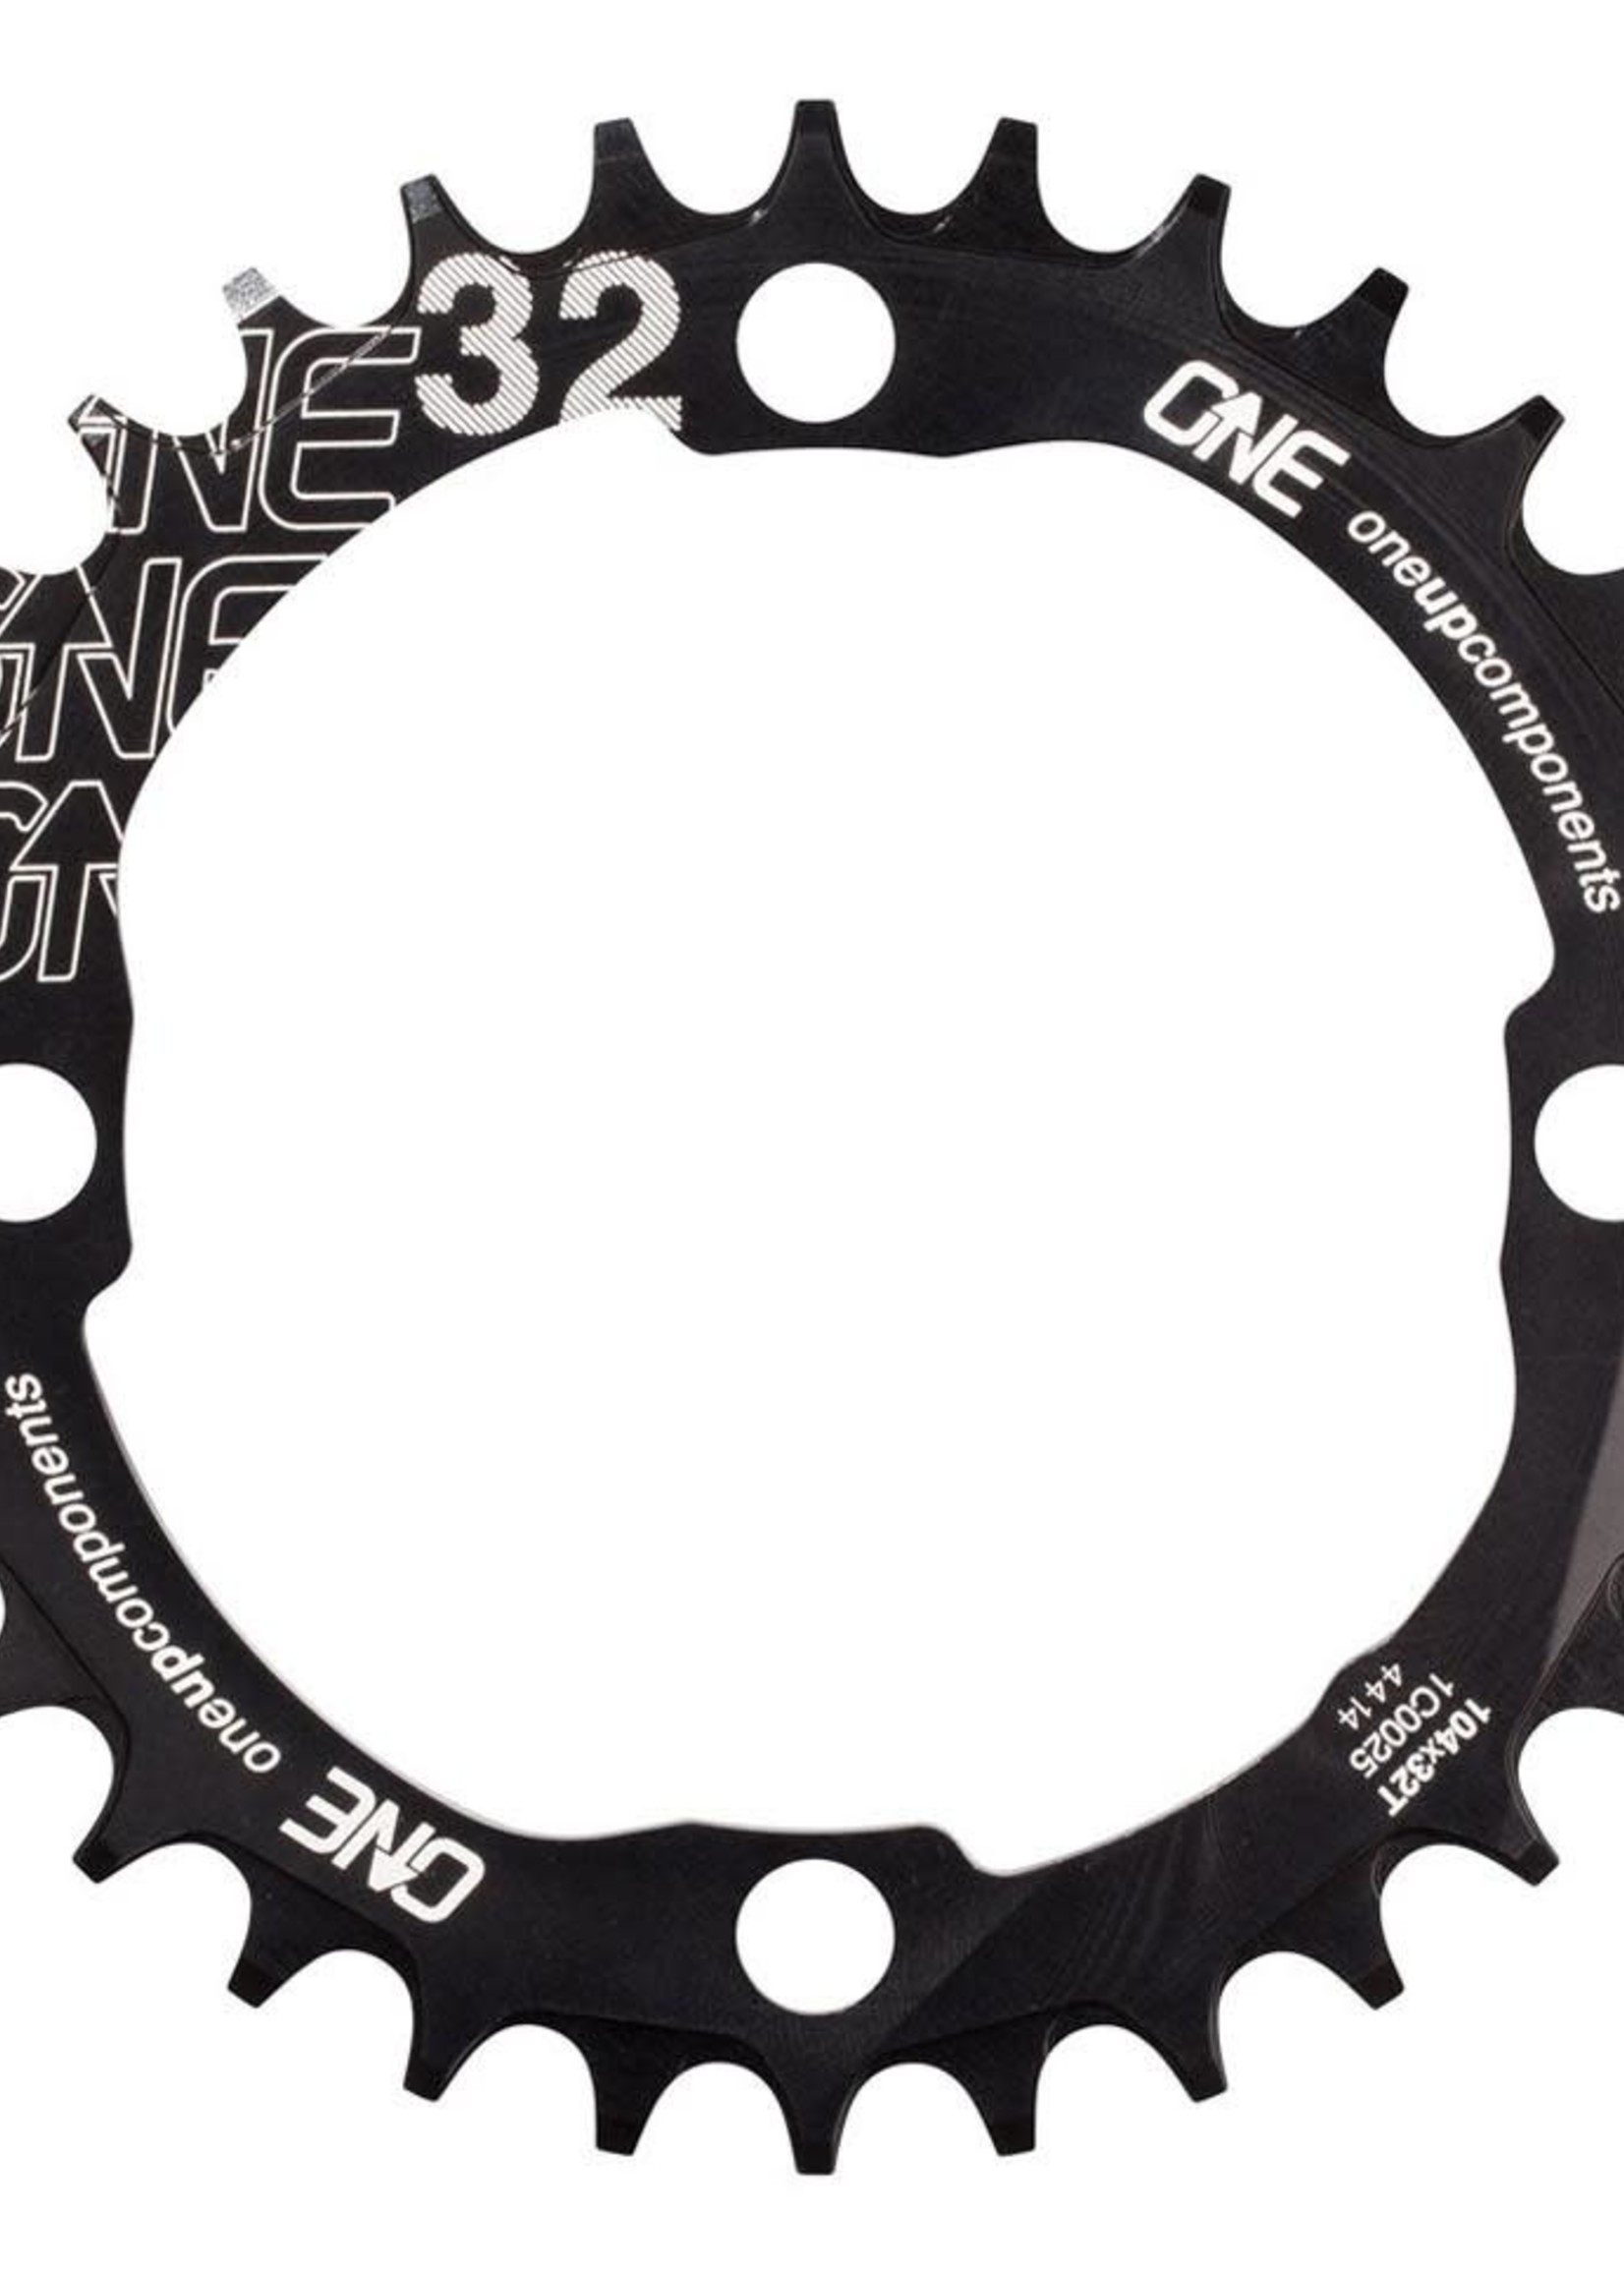 ONEUP Oneup Chainring 104bcd 1x